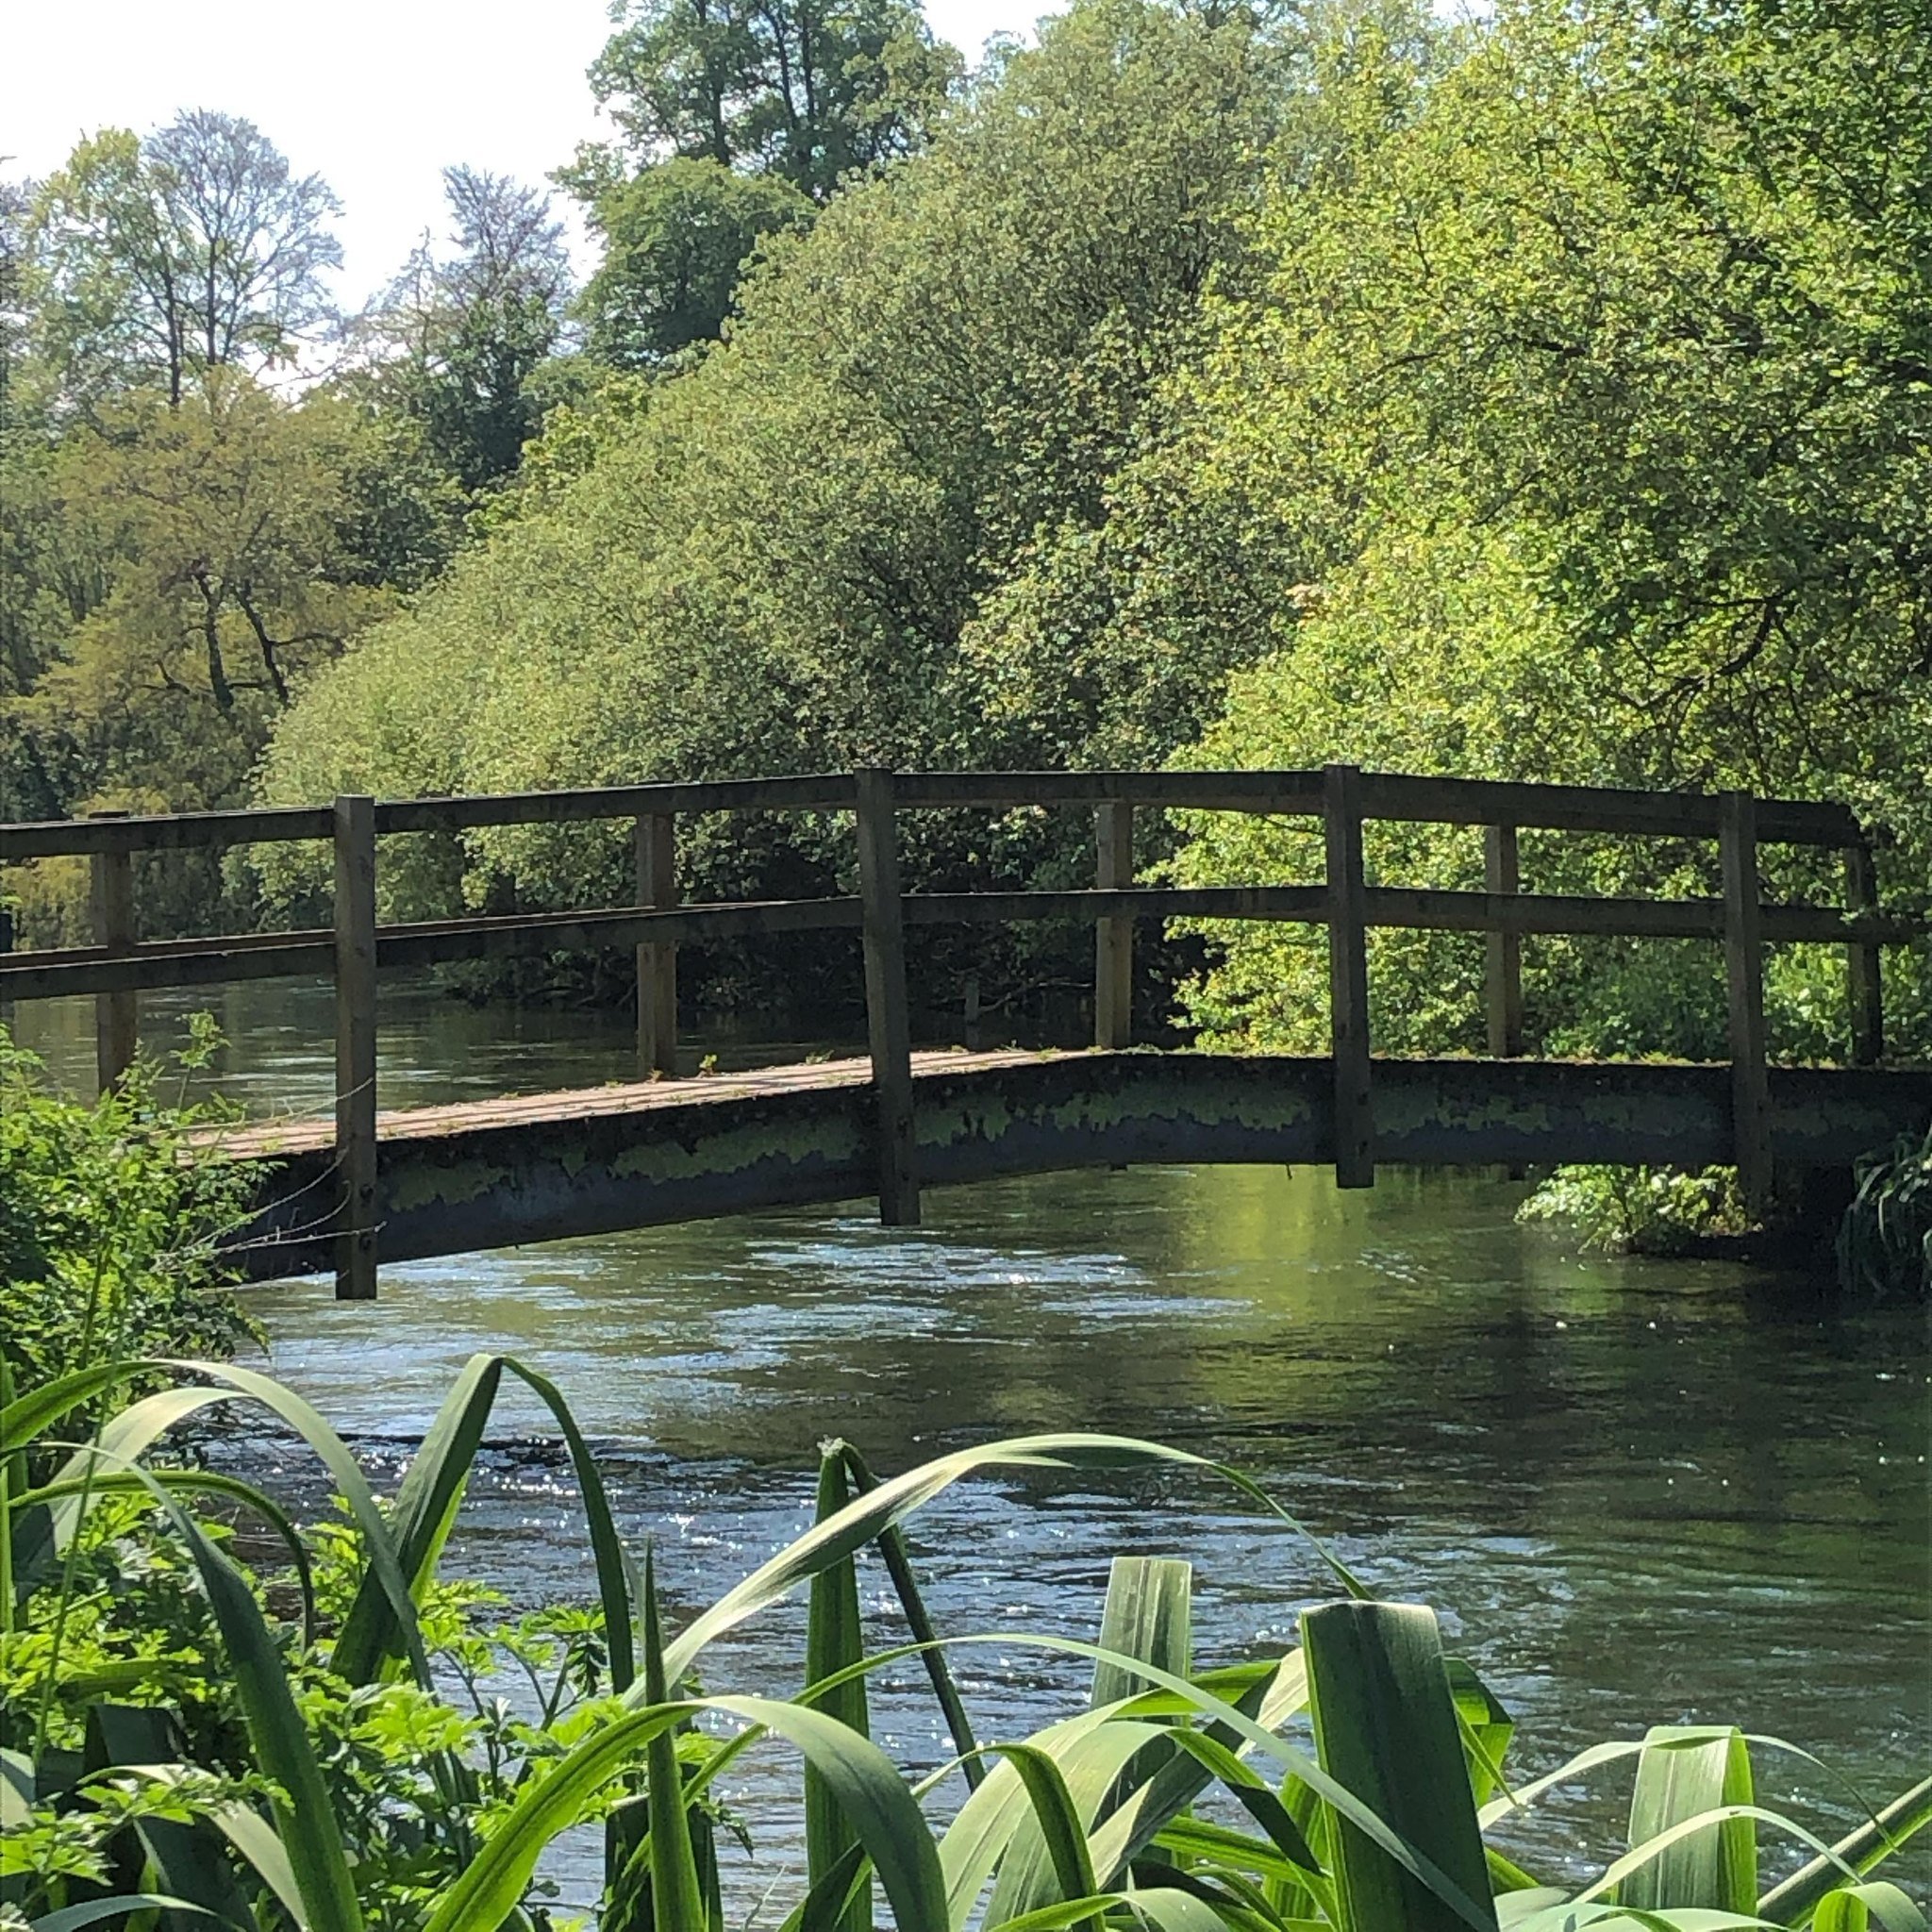 Ovington bridge spanning the River Itchen - one of the most iconic chalk streams in the world. Look&rsquo;s idyllic right? As I sat sketching, I got talking to a knowledgeable local who told me that the river has never been in poorer health. And as I